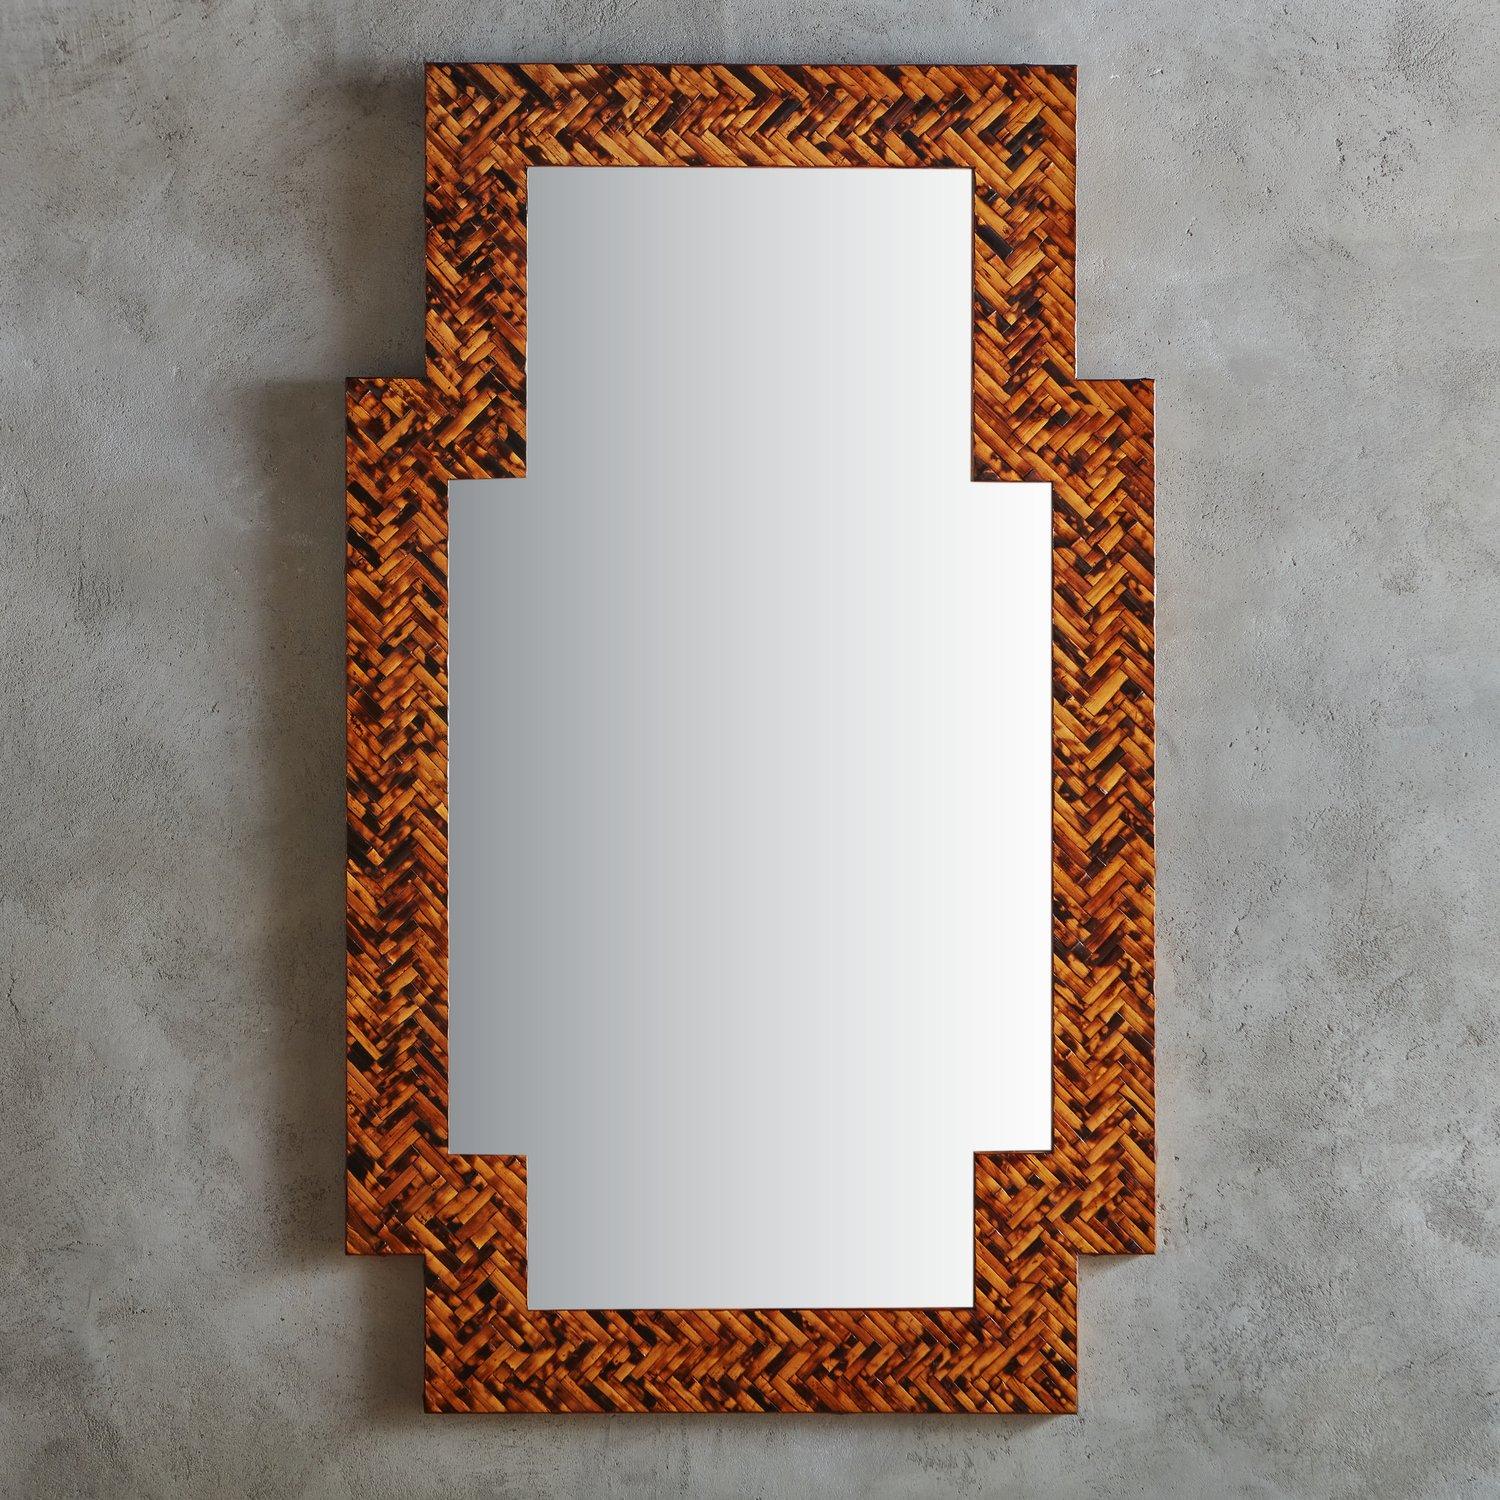 A large-scale 1980s wall mirror by Harrison Van Horn featuring a rectangular notched wooden frame clad in herringbone tessellated bamboo. The frame has a gorgeous range of cognac and amber hues and supports a delicately etched banded mirror. Retains